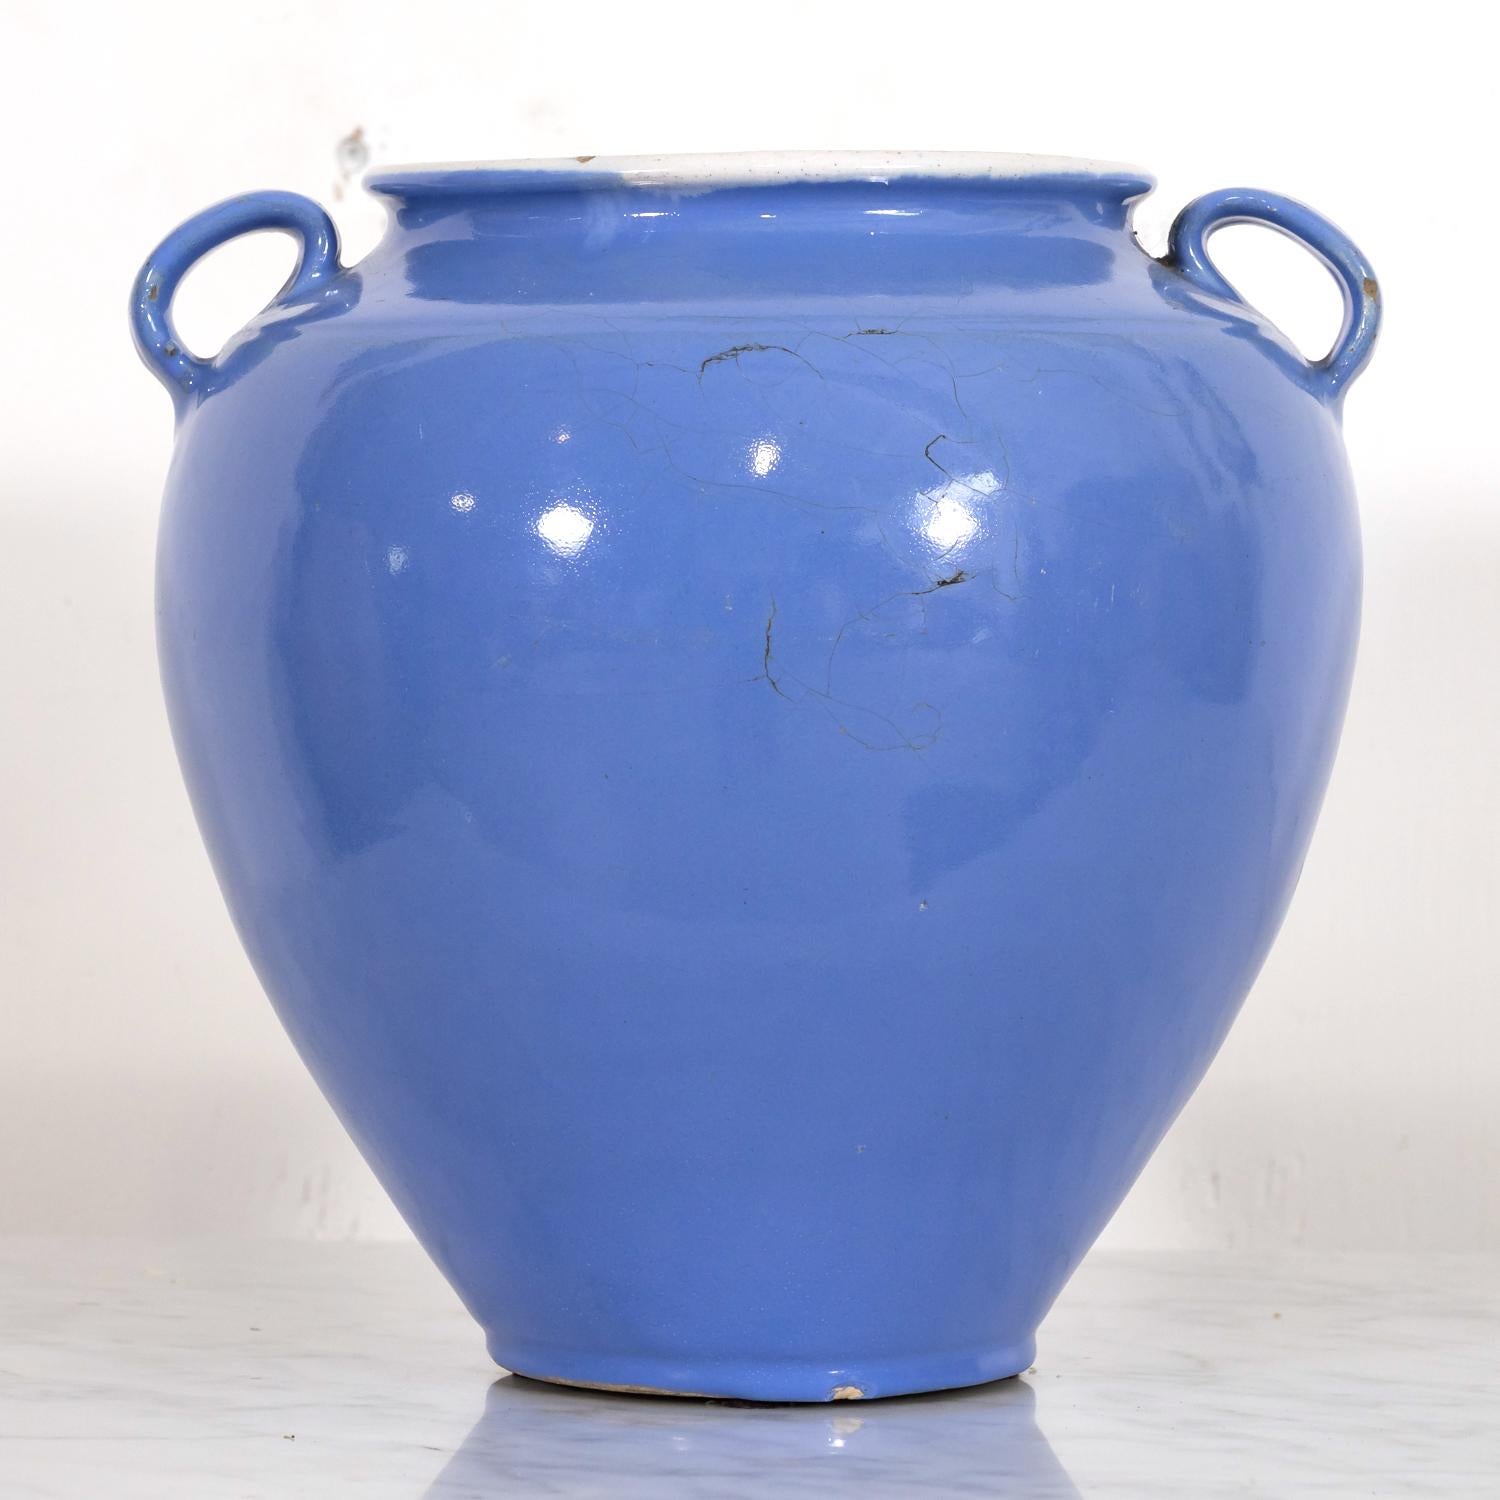 Glazed Rare 19th Century French Confit Pot or Egg Pot with Blue Glaze For Sale